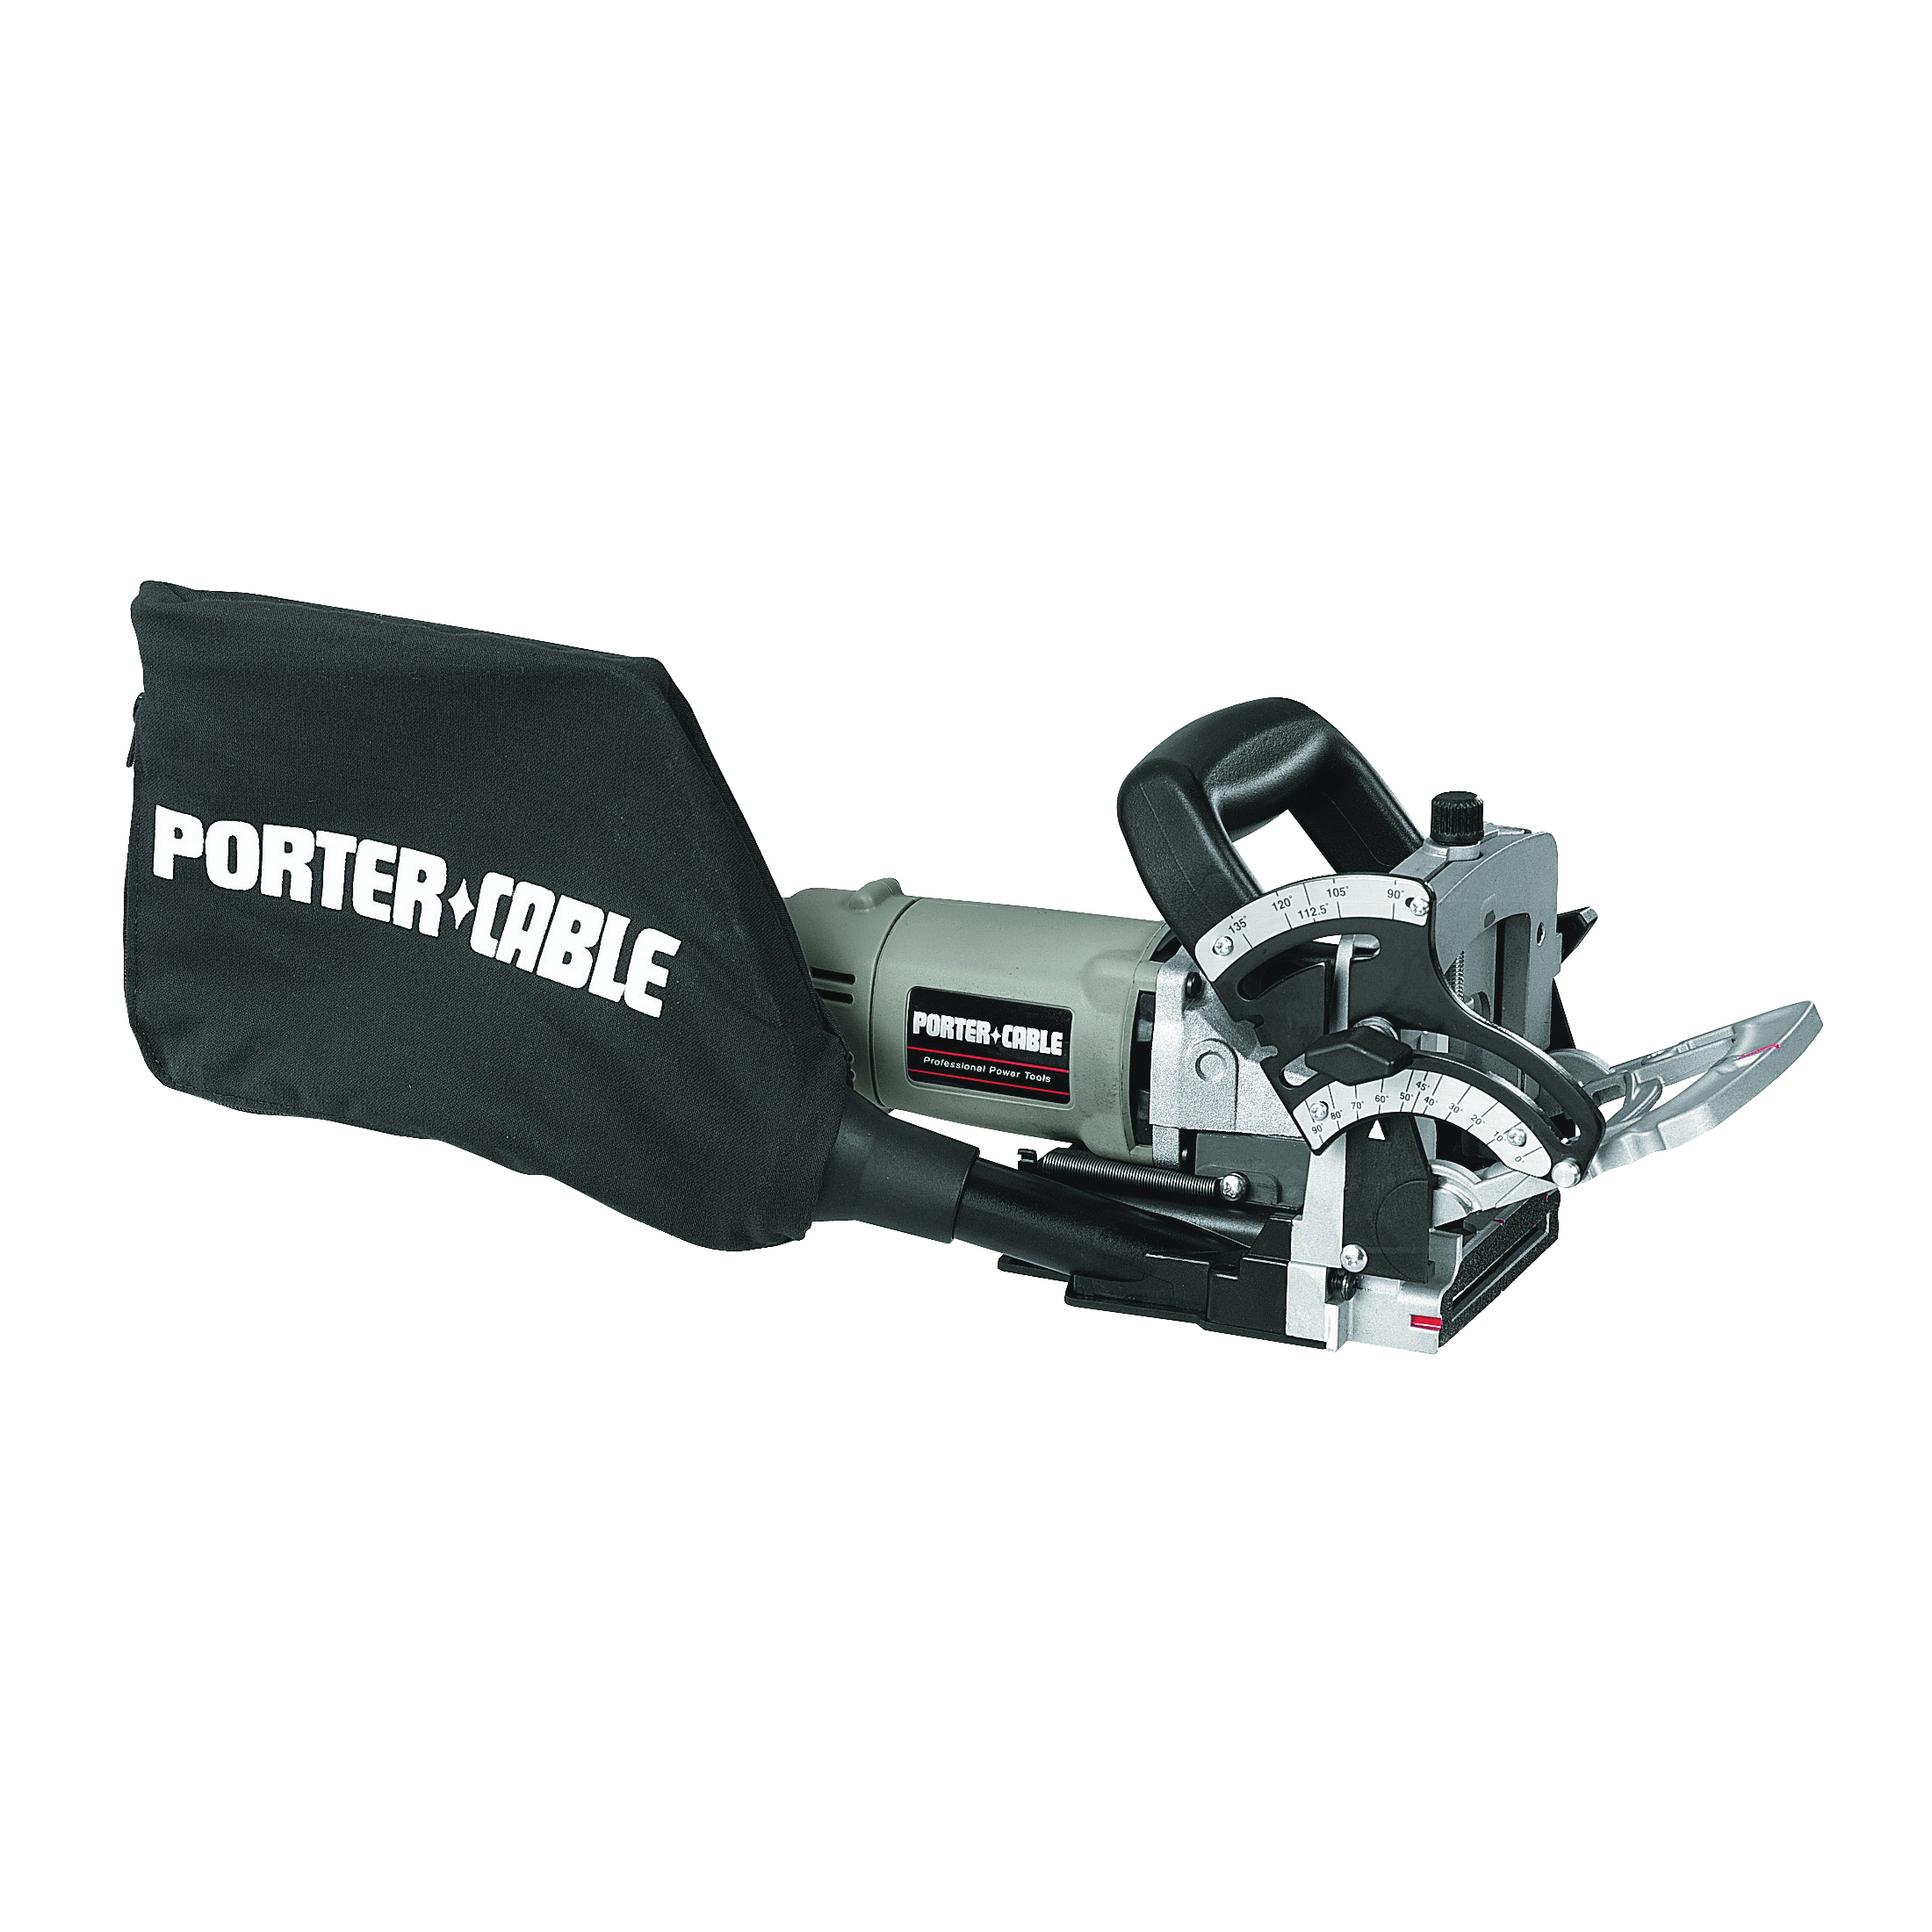 PORTER-CABLE 557 Plate Joiner Kit, 7 A, 20 in D Cutting, FF, #0, #10, #20, Simplex, Duplex, #6 Max Biscuit, 6 T Blade - 1